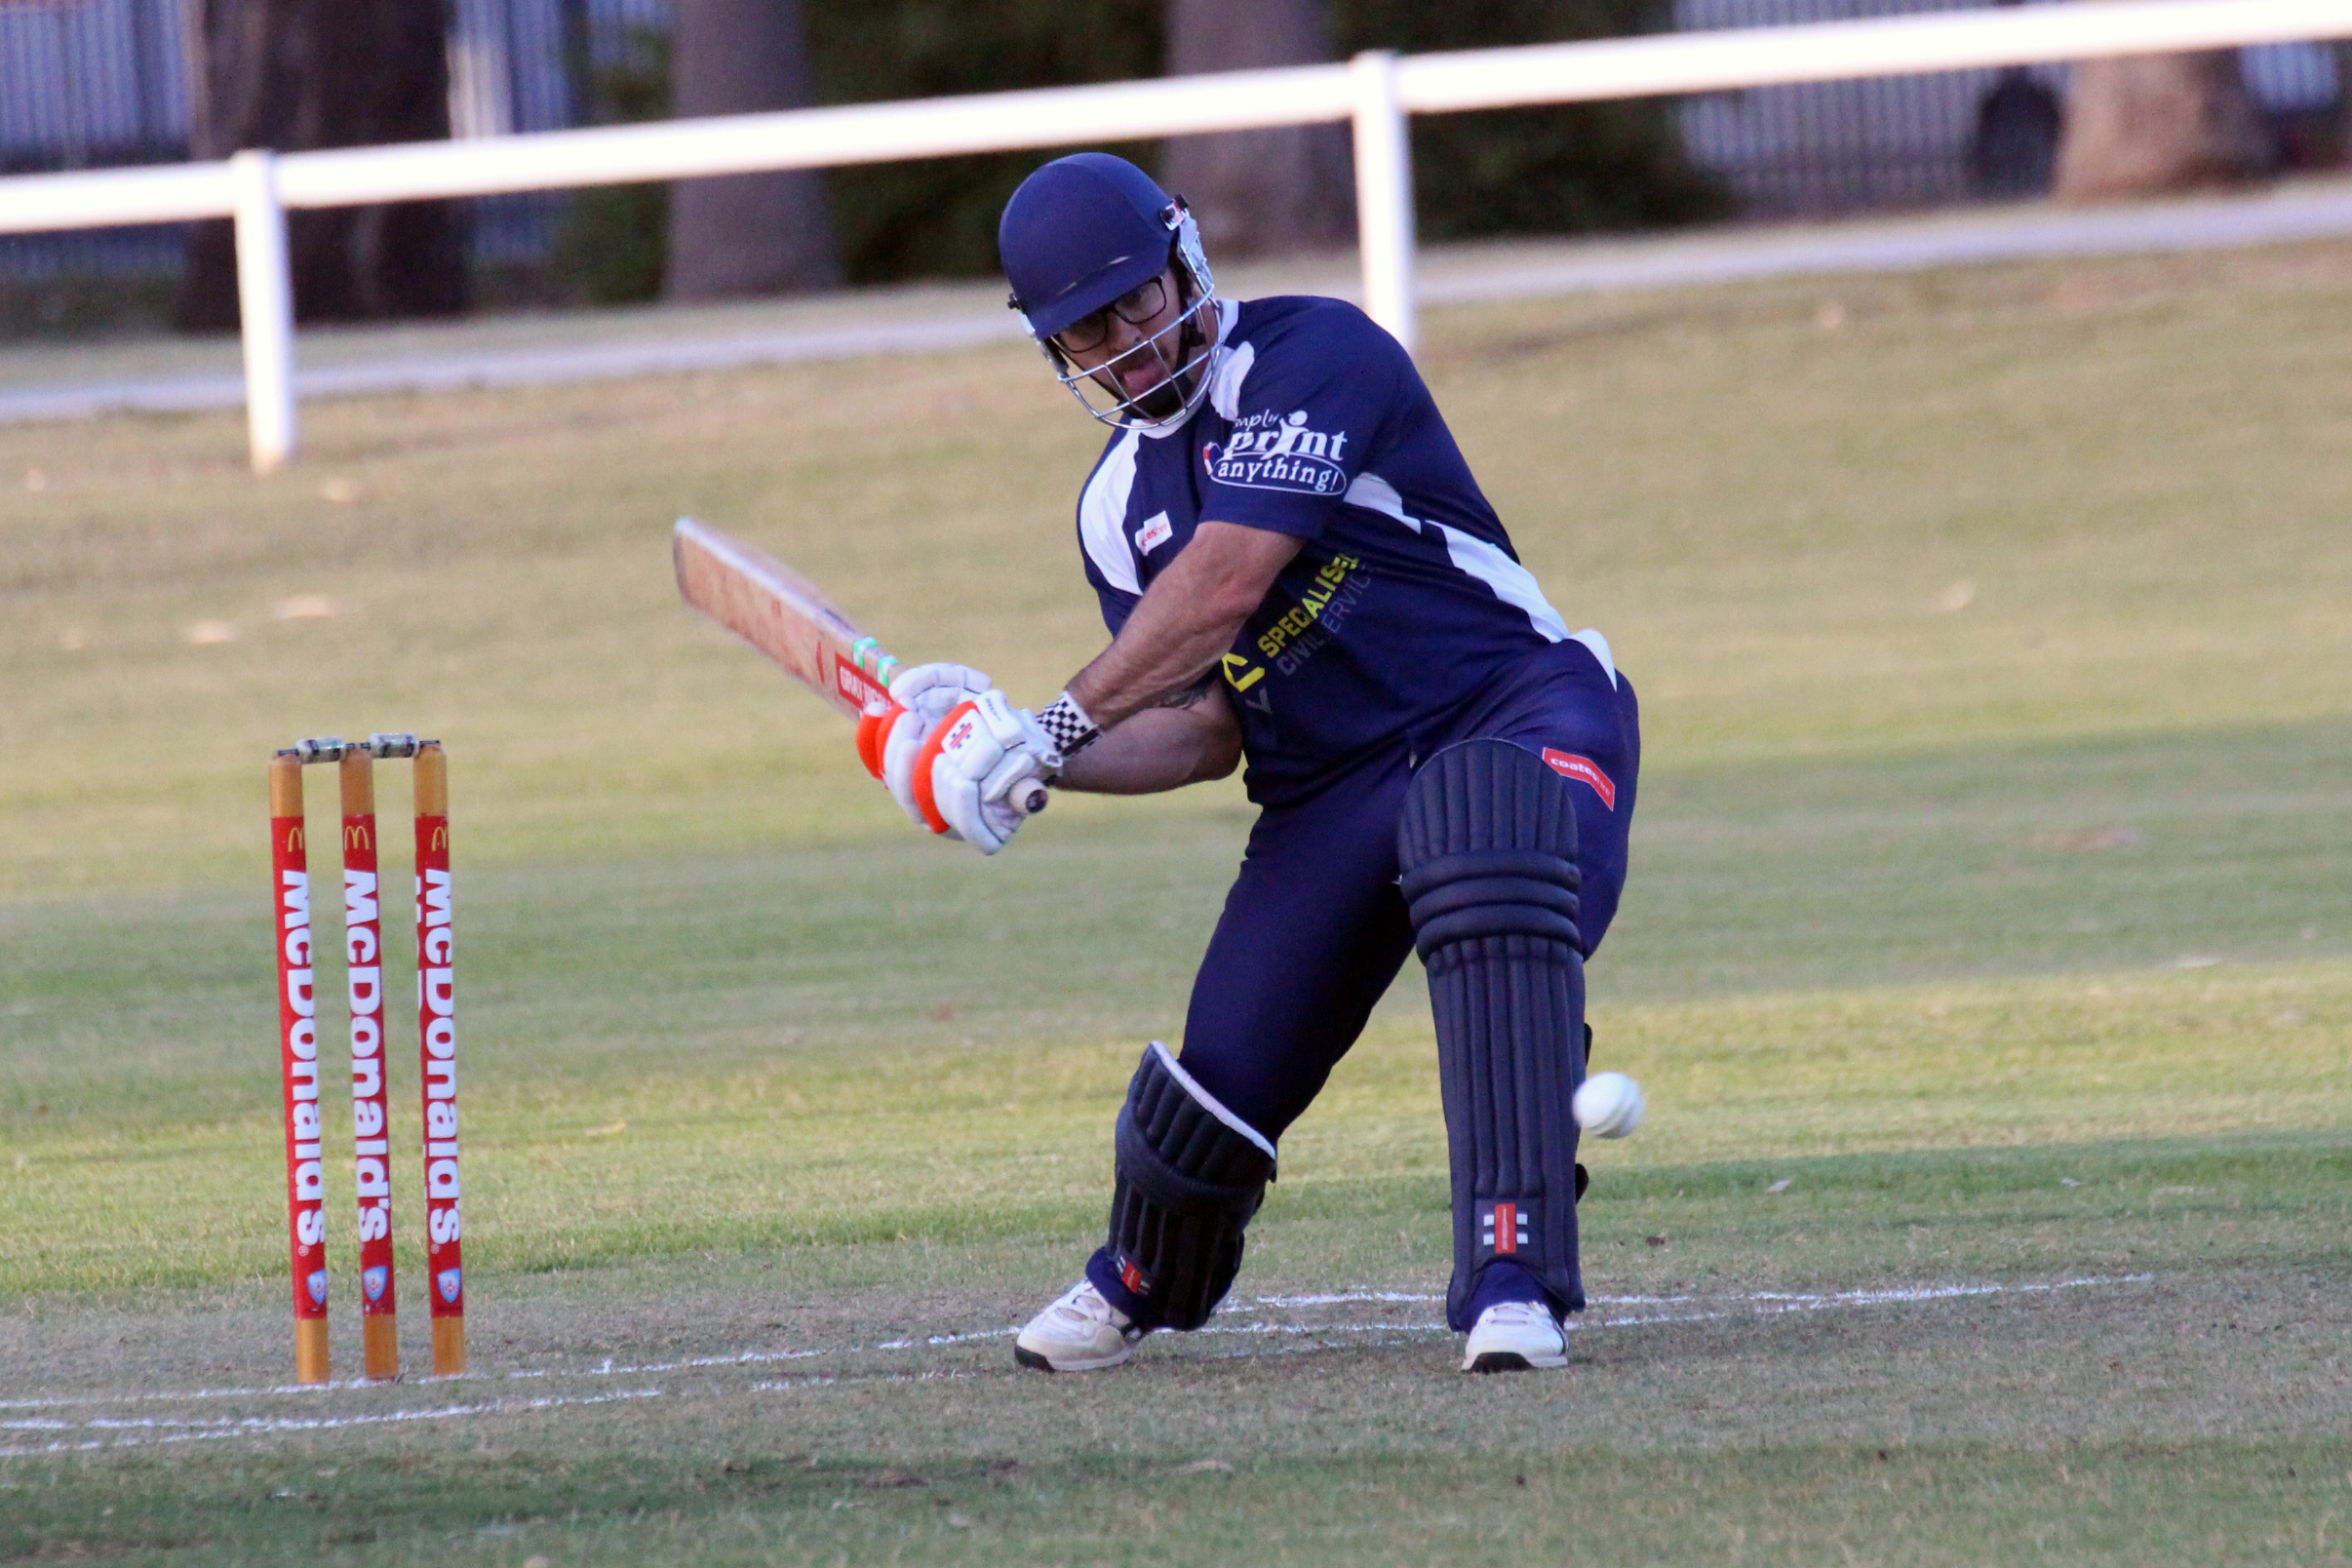 Player auction date announced for NDCA’s 2023/24 Namoi Super Slog T20 campaign